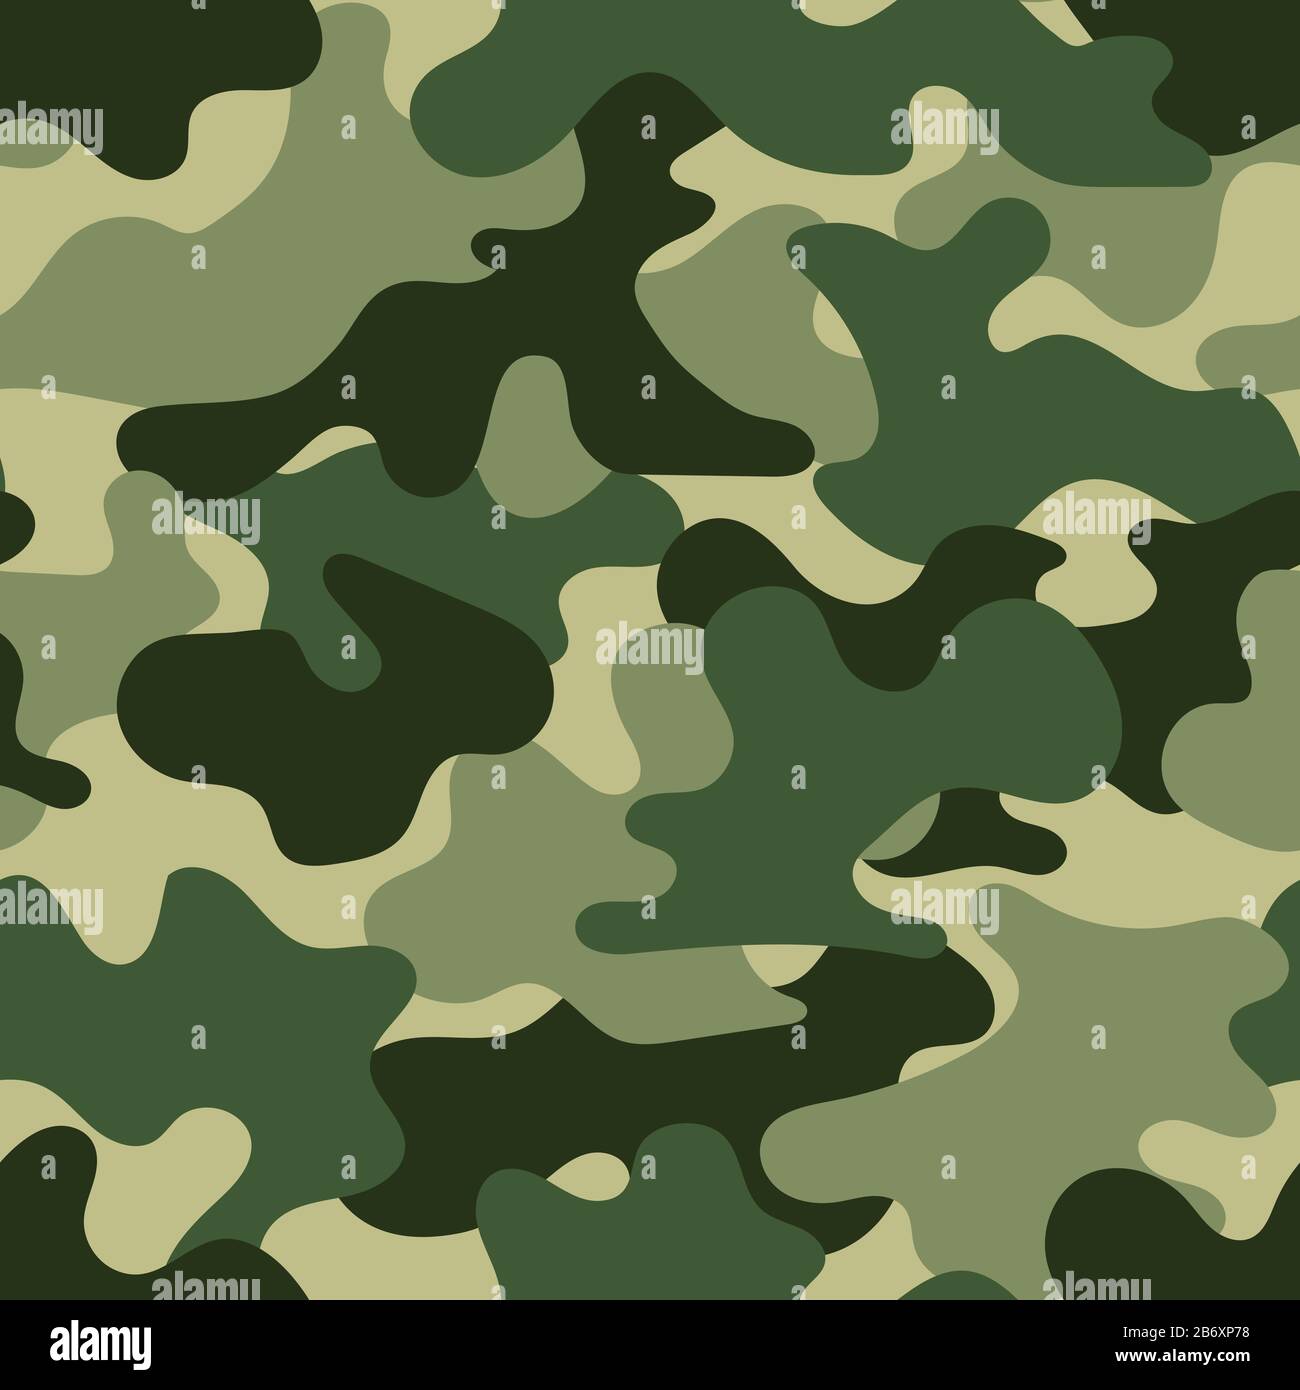 Soldier pattern Stock Vector Images - Alamy